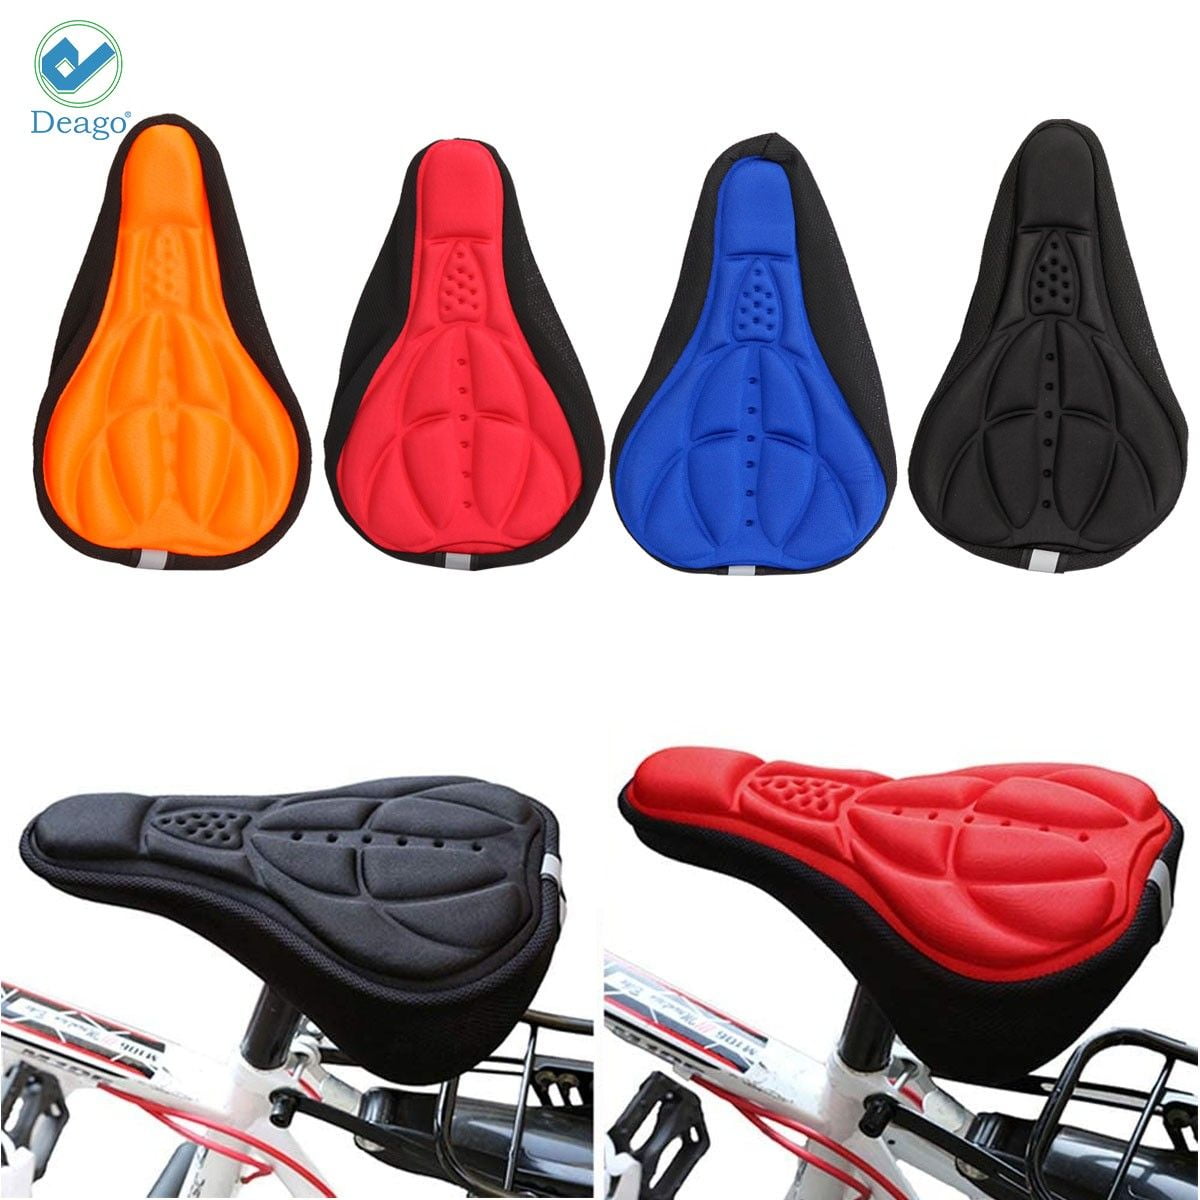 Bike Bicycle Silicone 3D Gel Saddle Seat Cover Pad Padded Soft Cushion Comfort